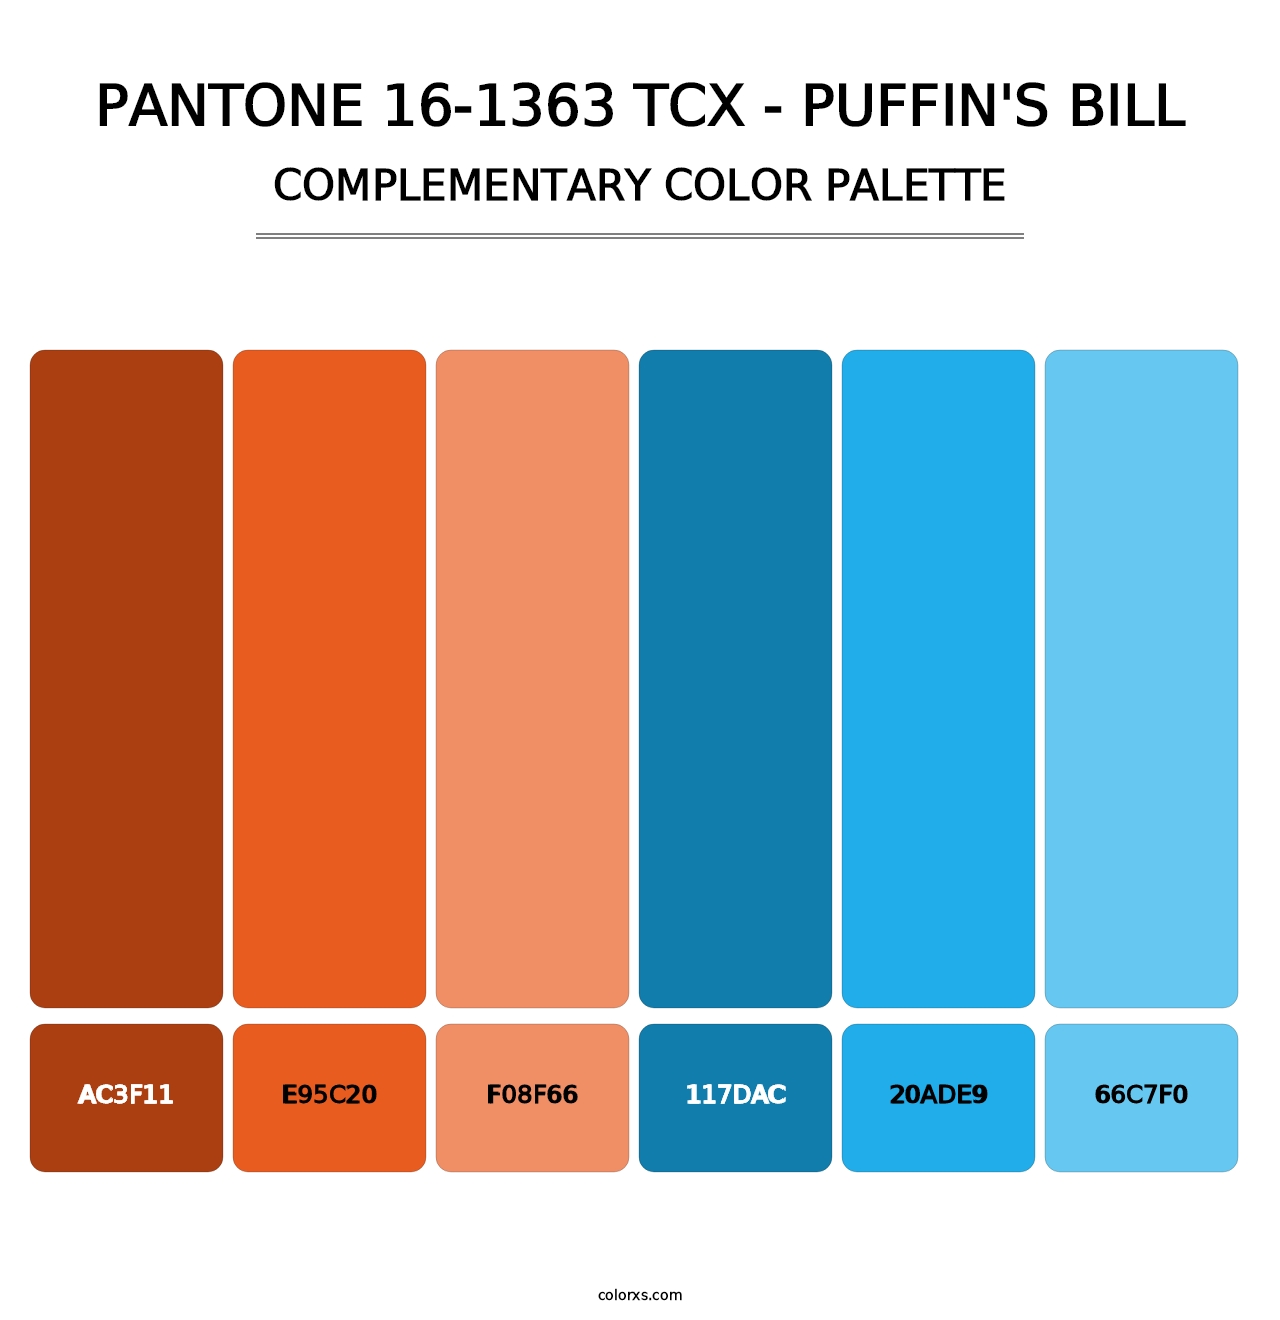 PANTONE 16-1363 TCX - Puffin's Bill - Complementary Color Palette